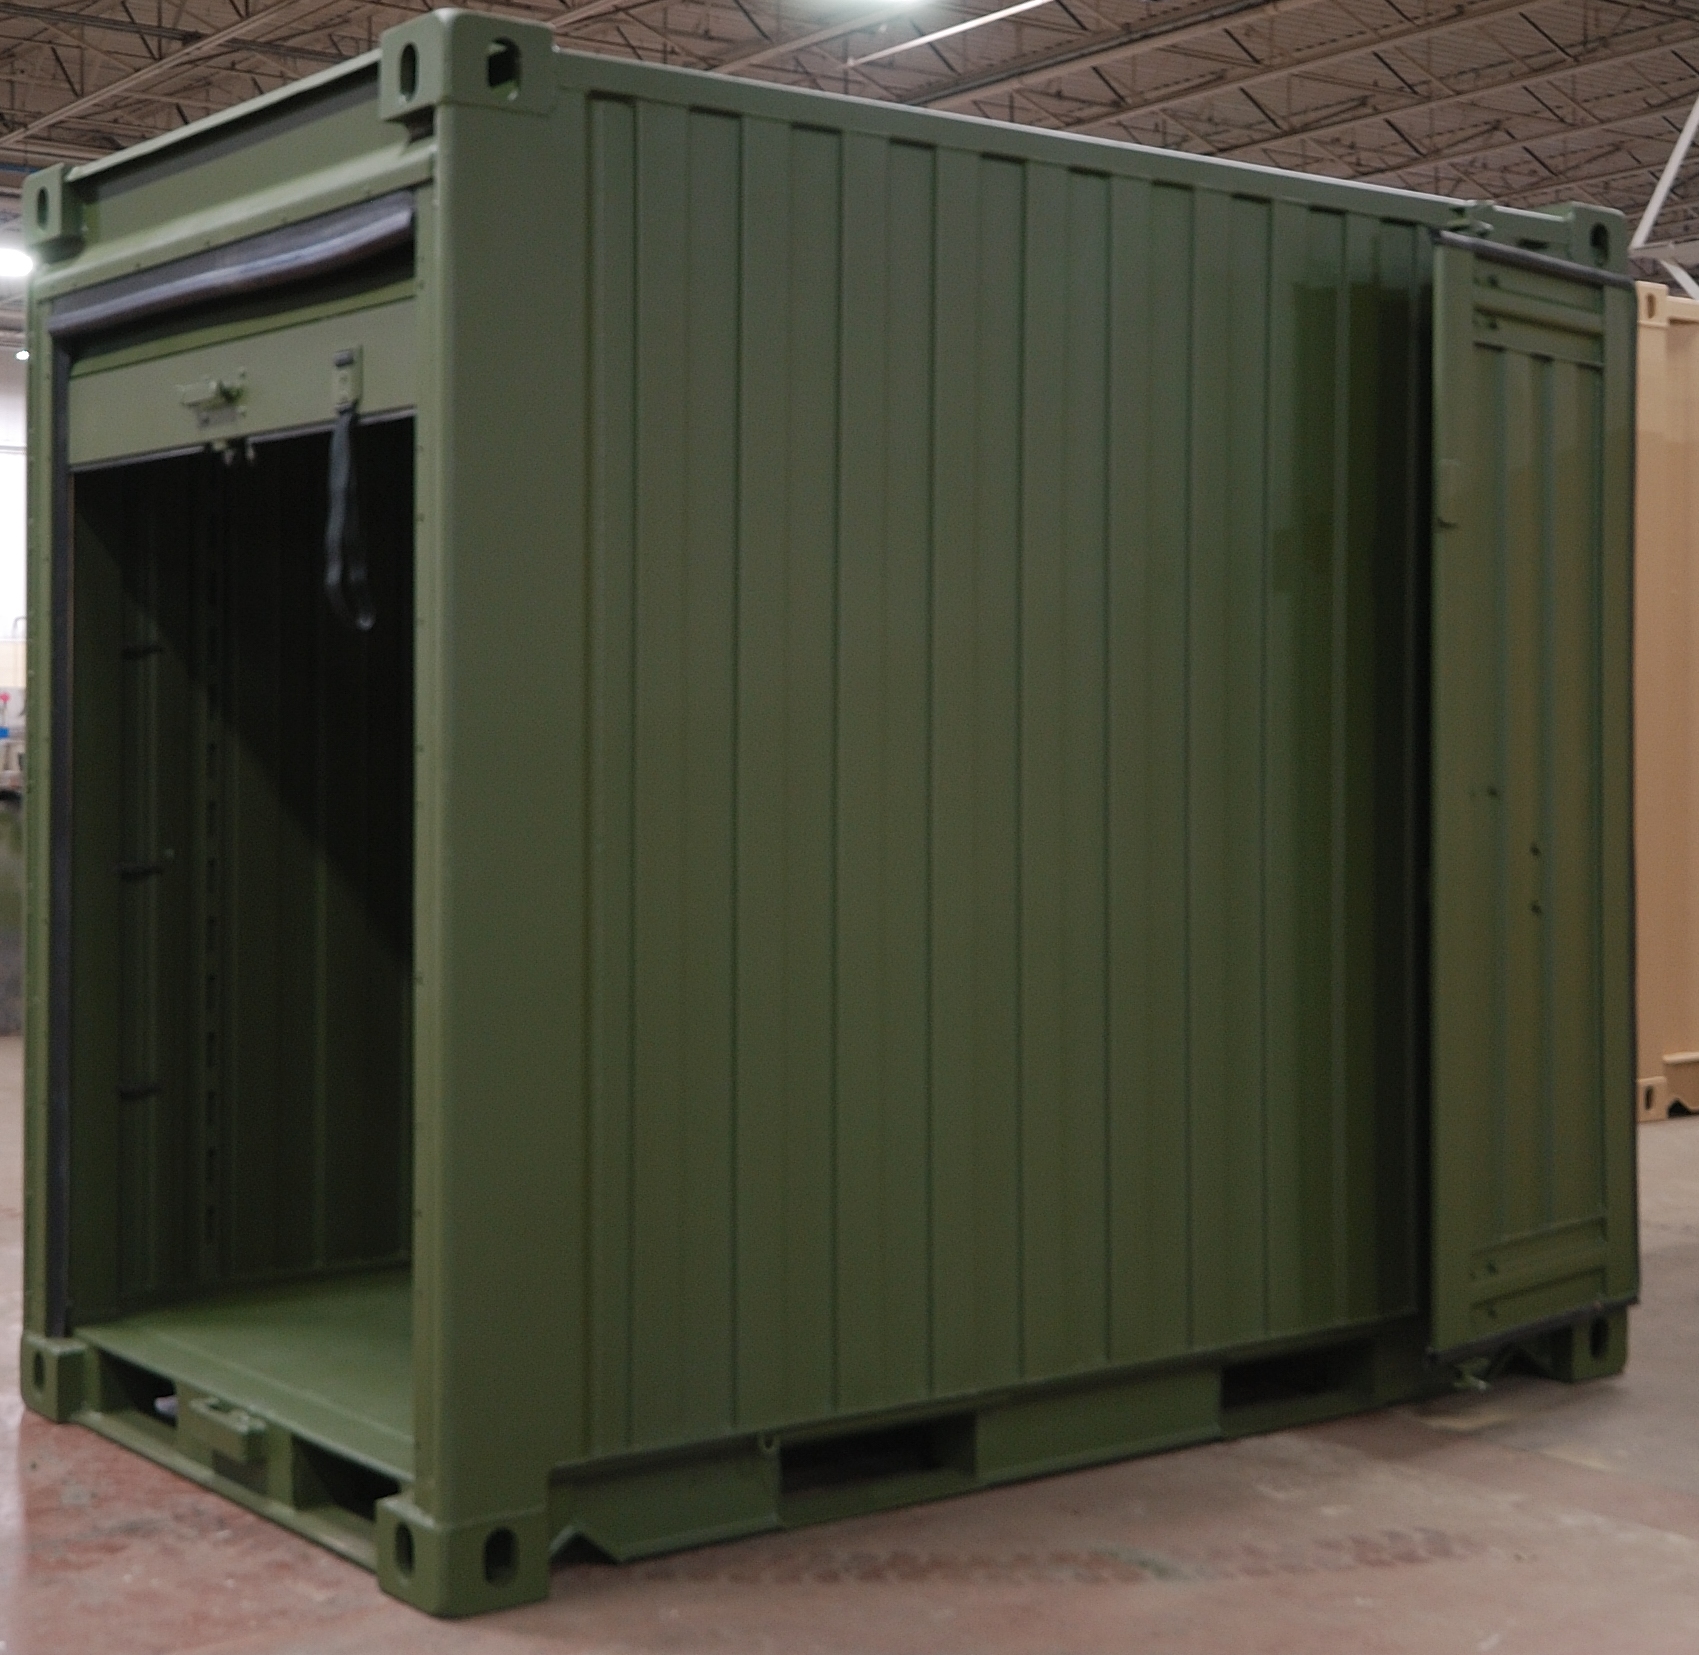 Quadcon Dry Freight ISO Container (6’10